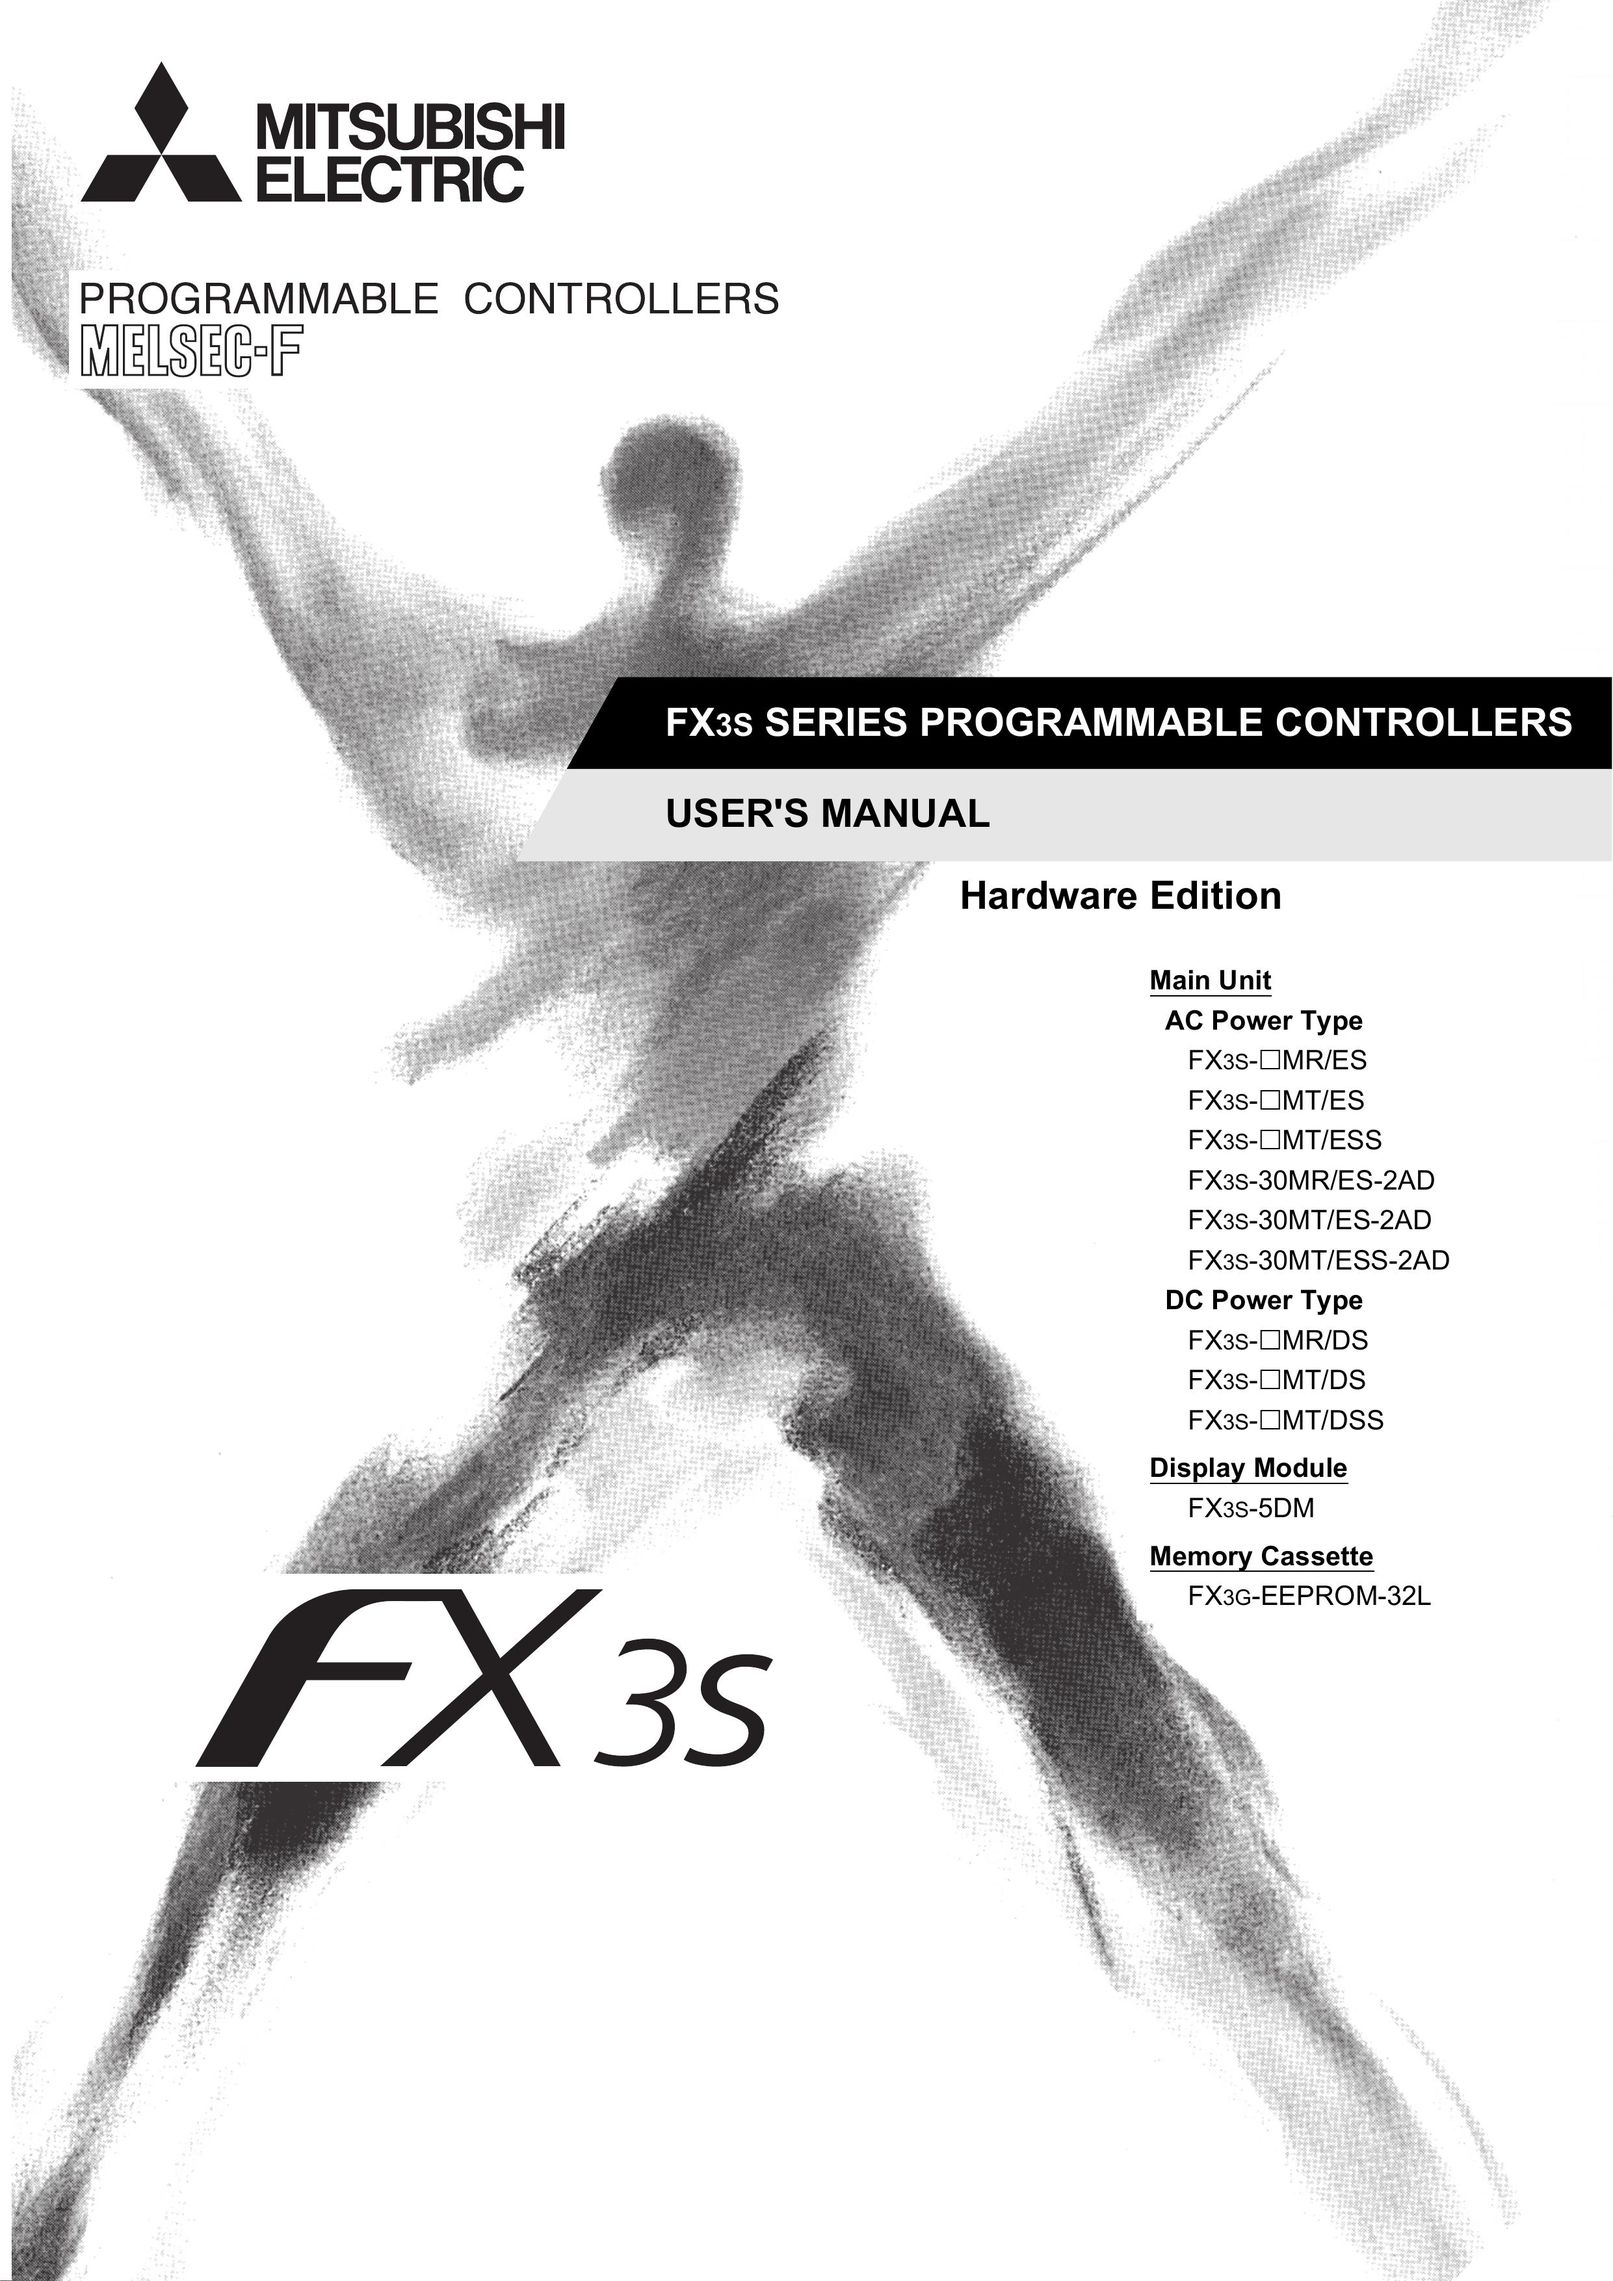 Mitsubishi Electronics FX3S-MR/DS Home Theater Server User Manual